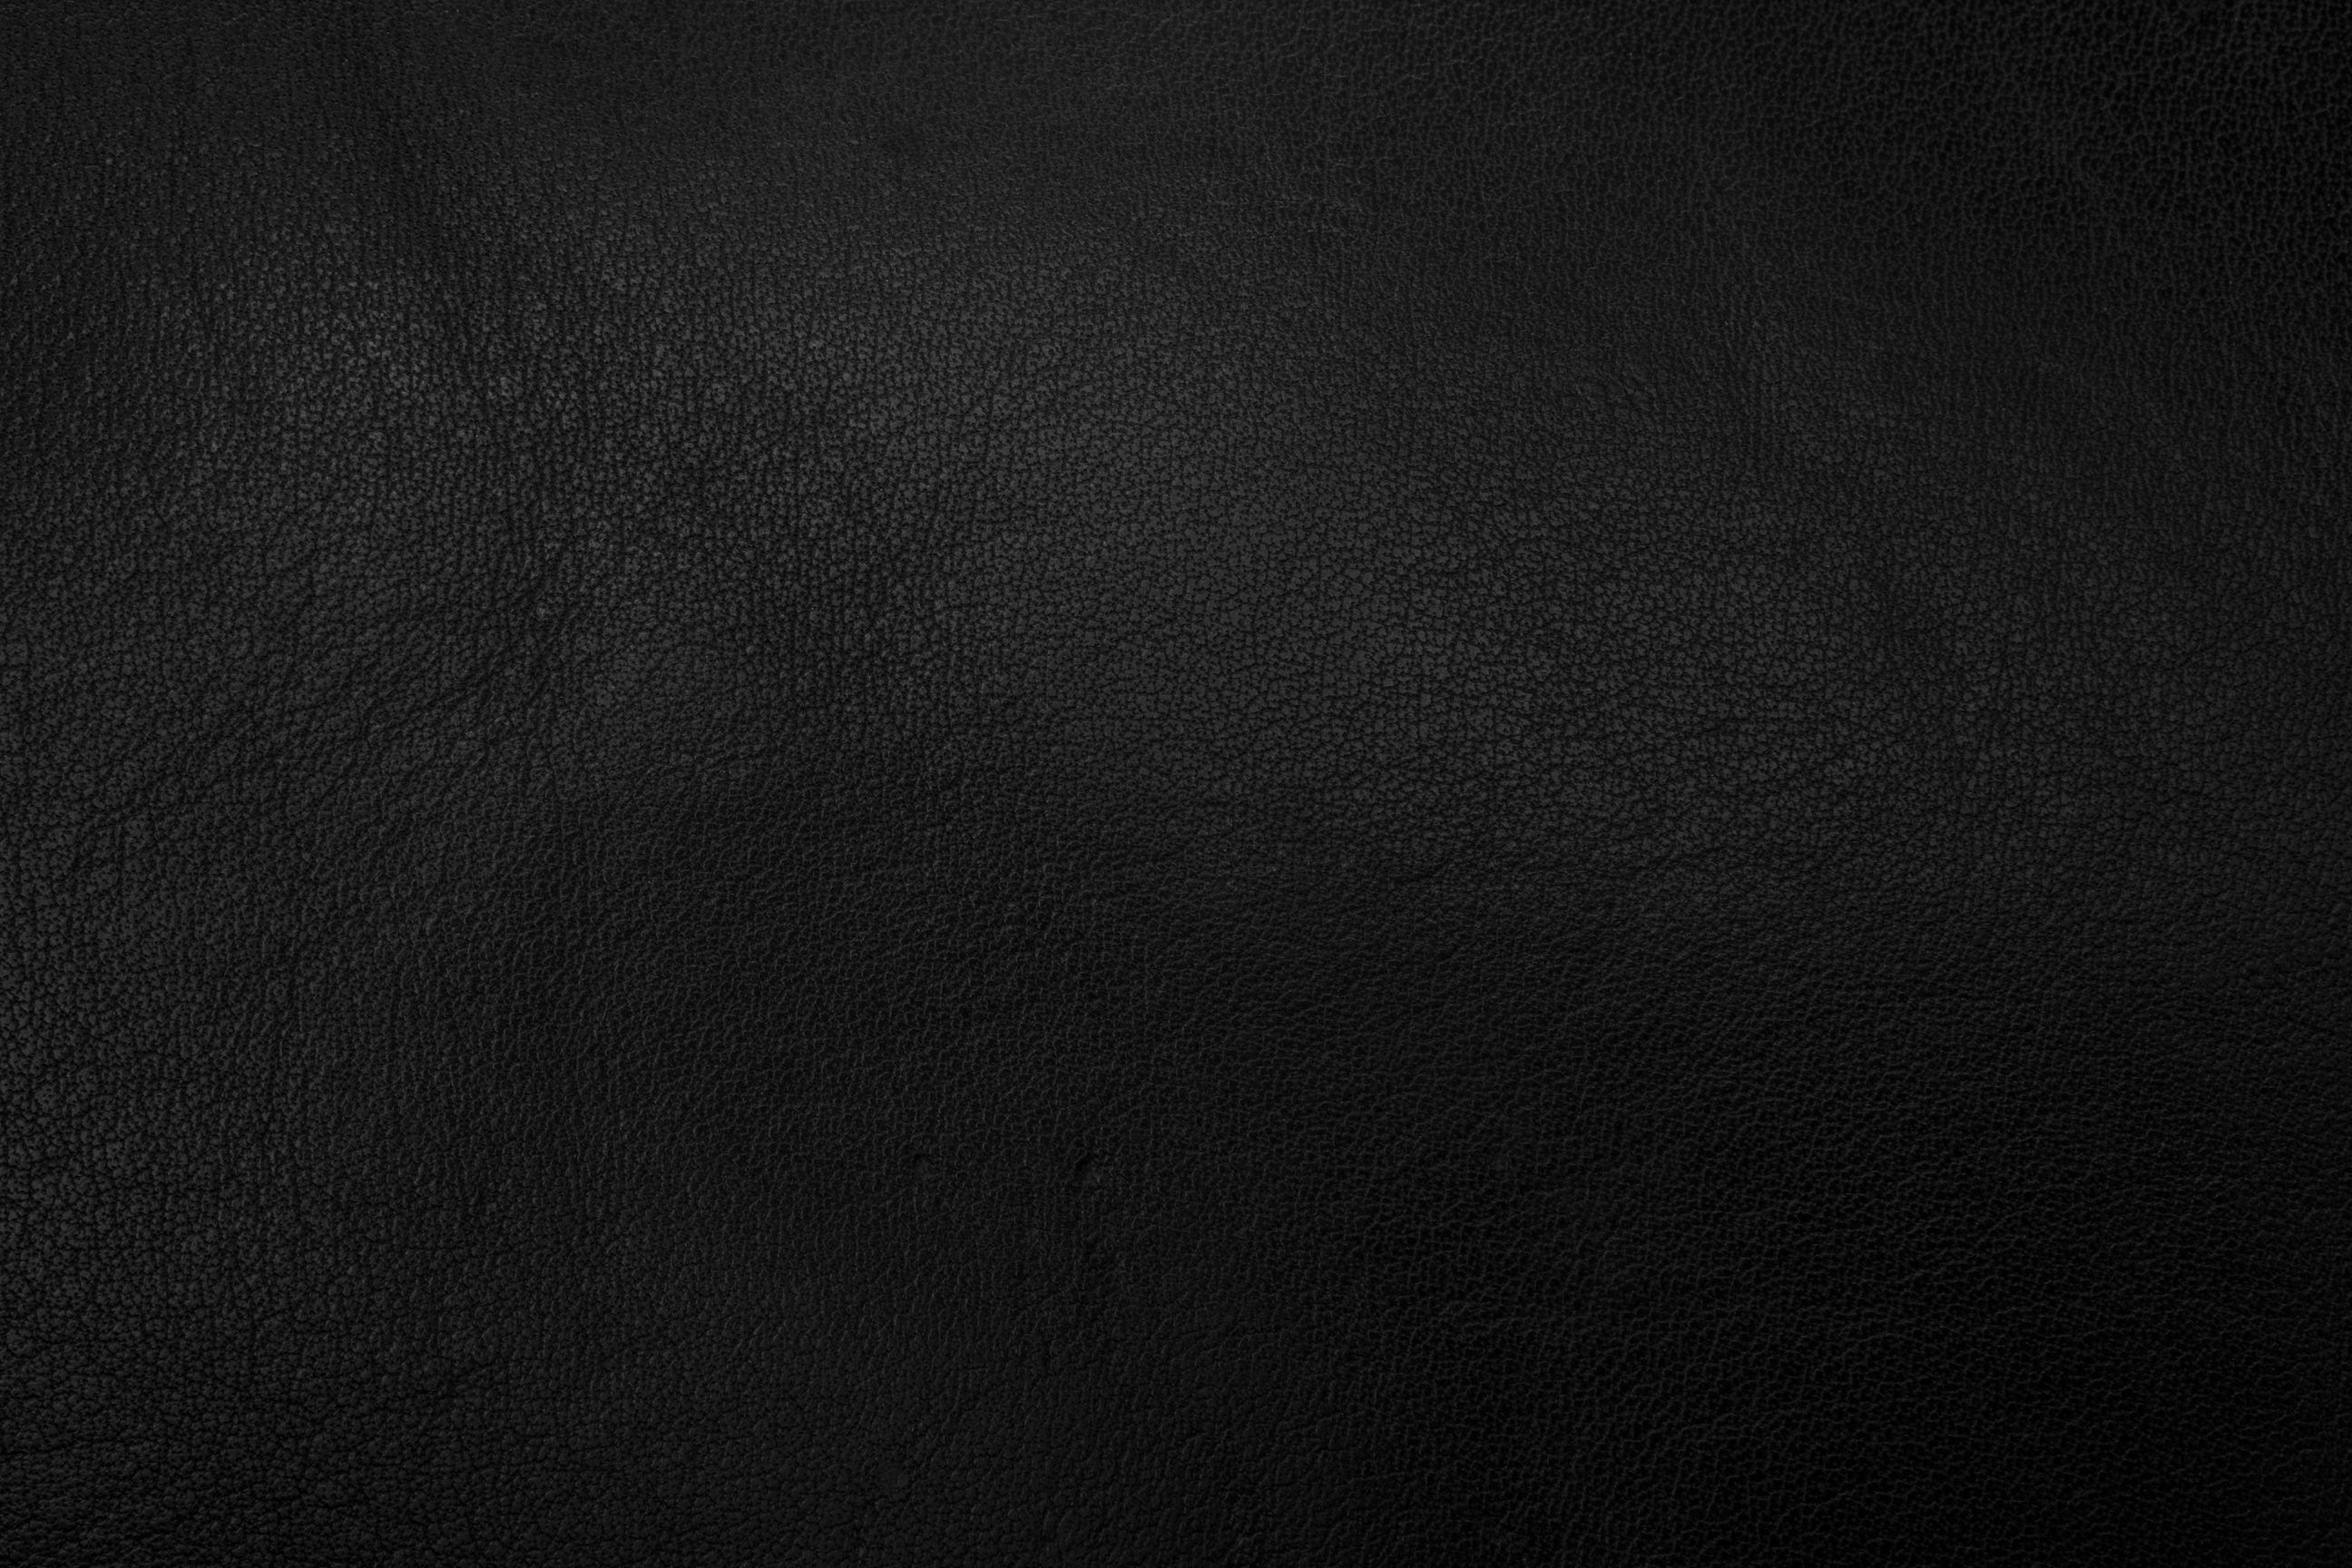 Black Leather Surface